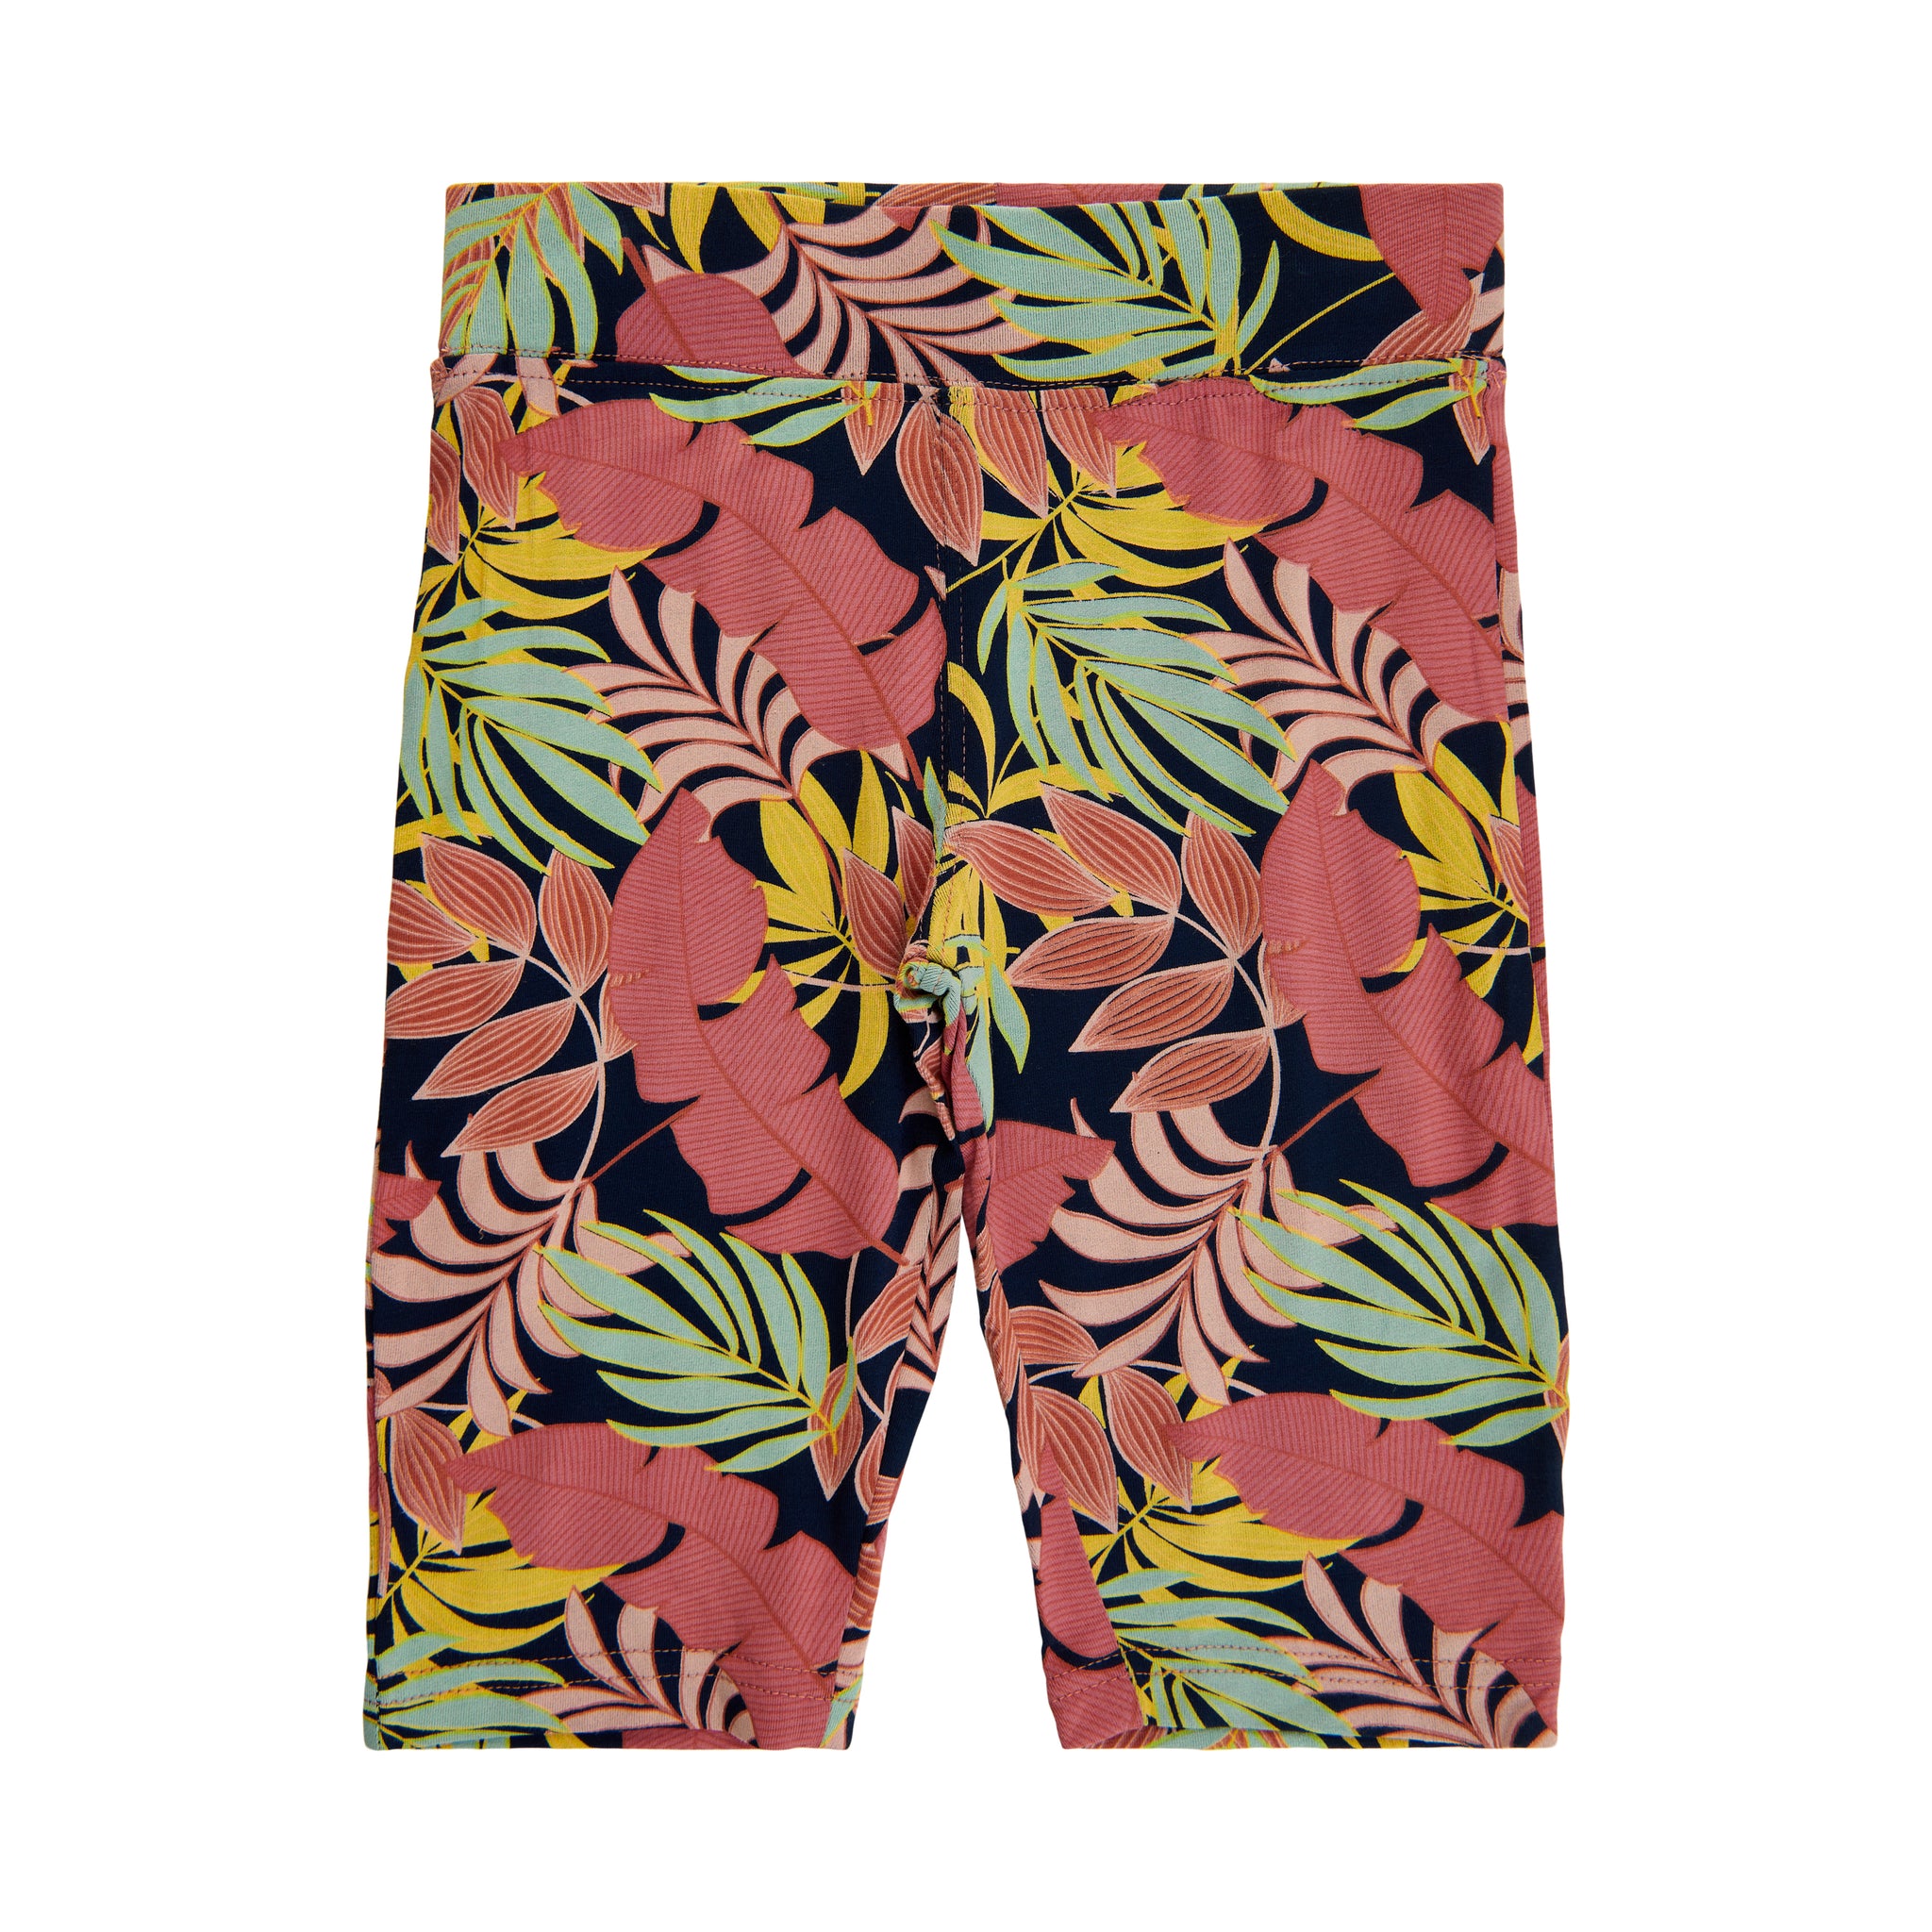 THE NEW - Calypso Cycle Shorts (TN4210) - Tropic AOP